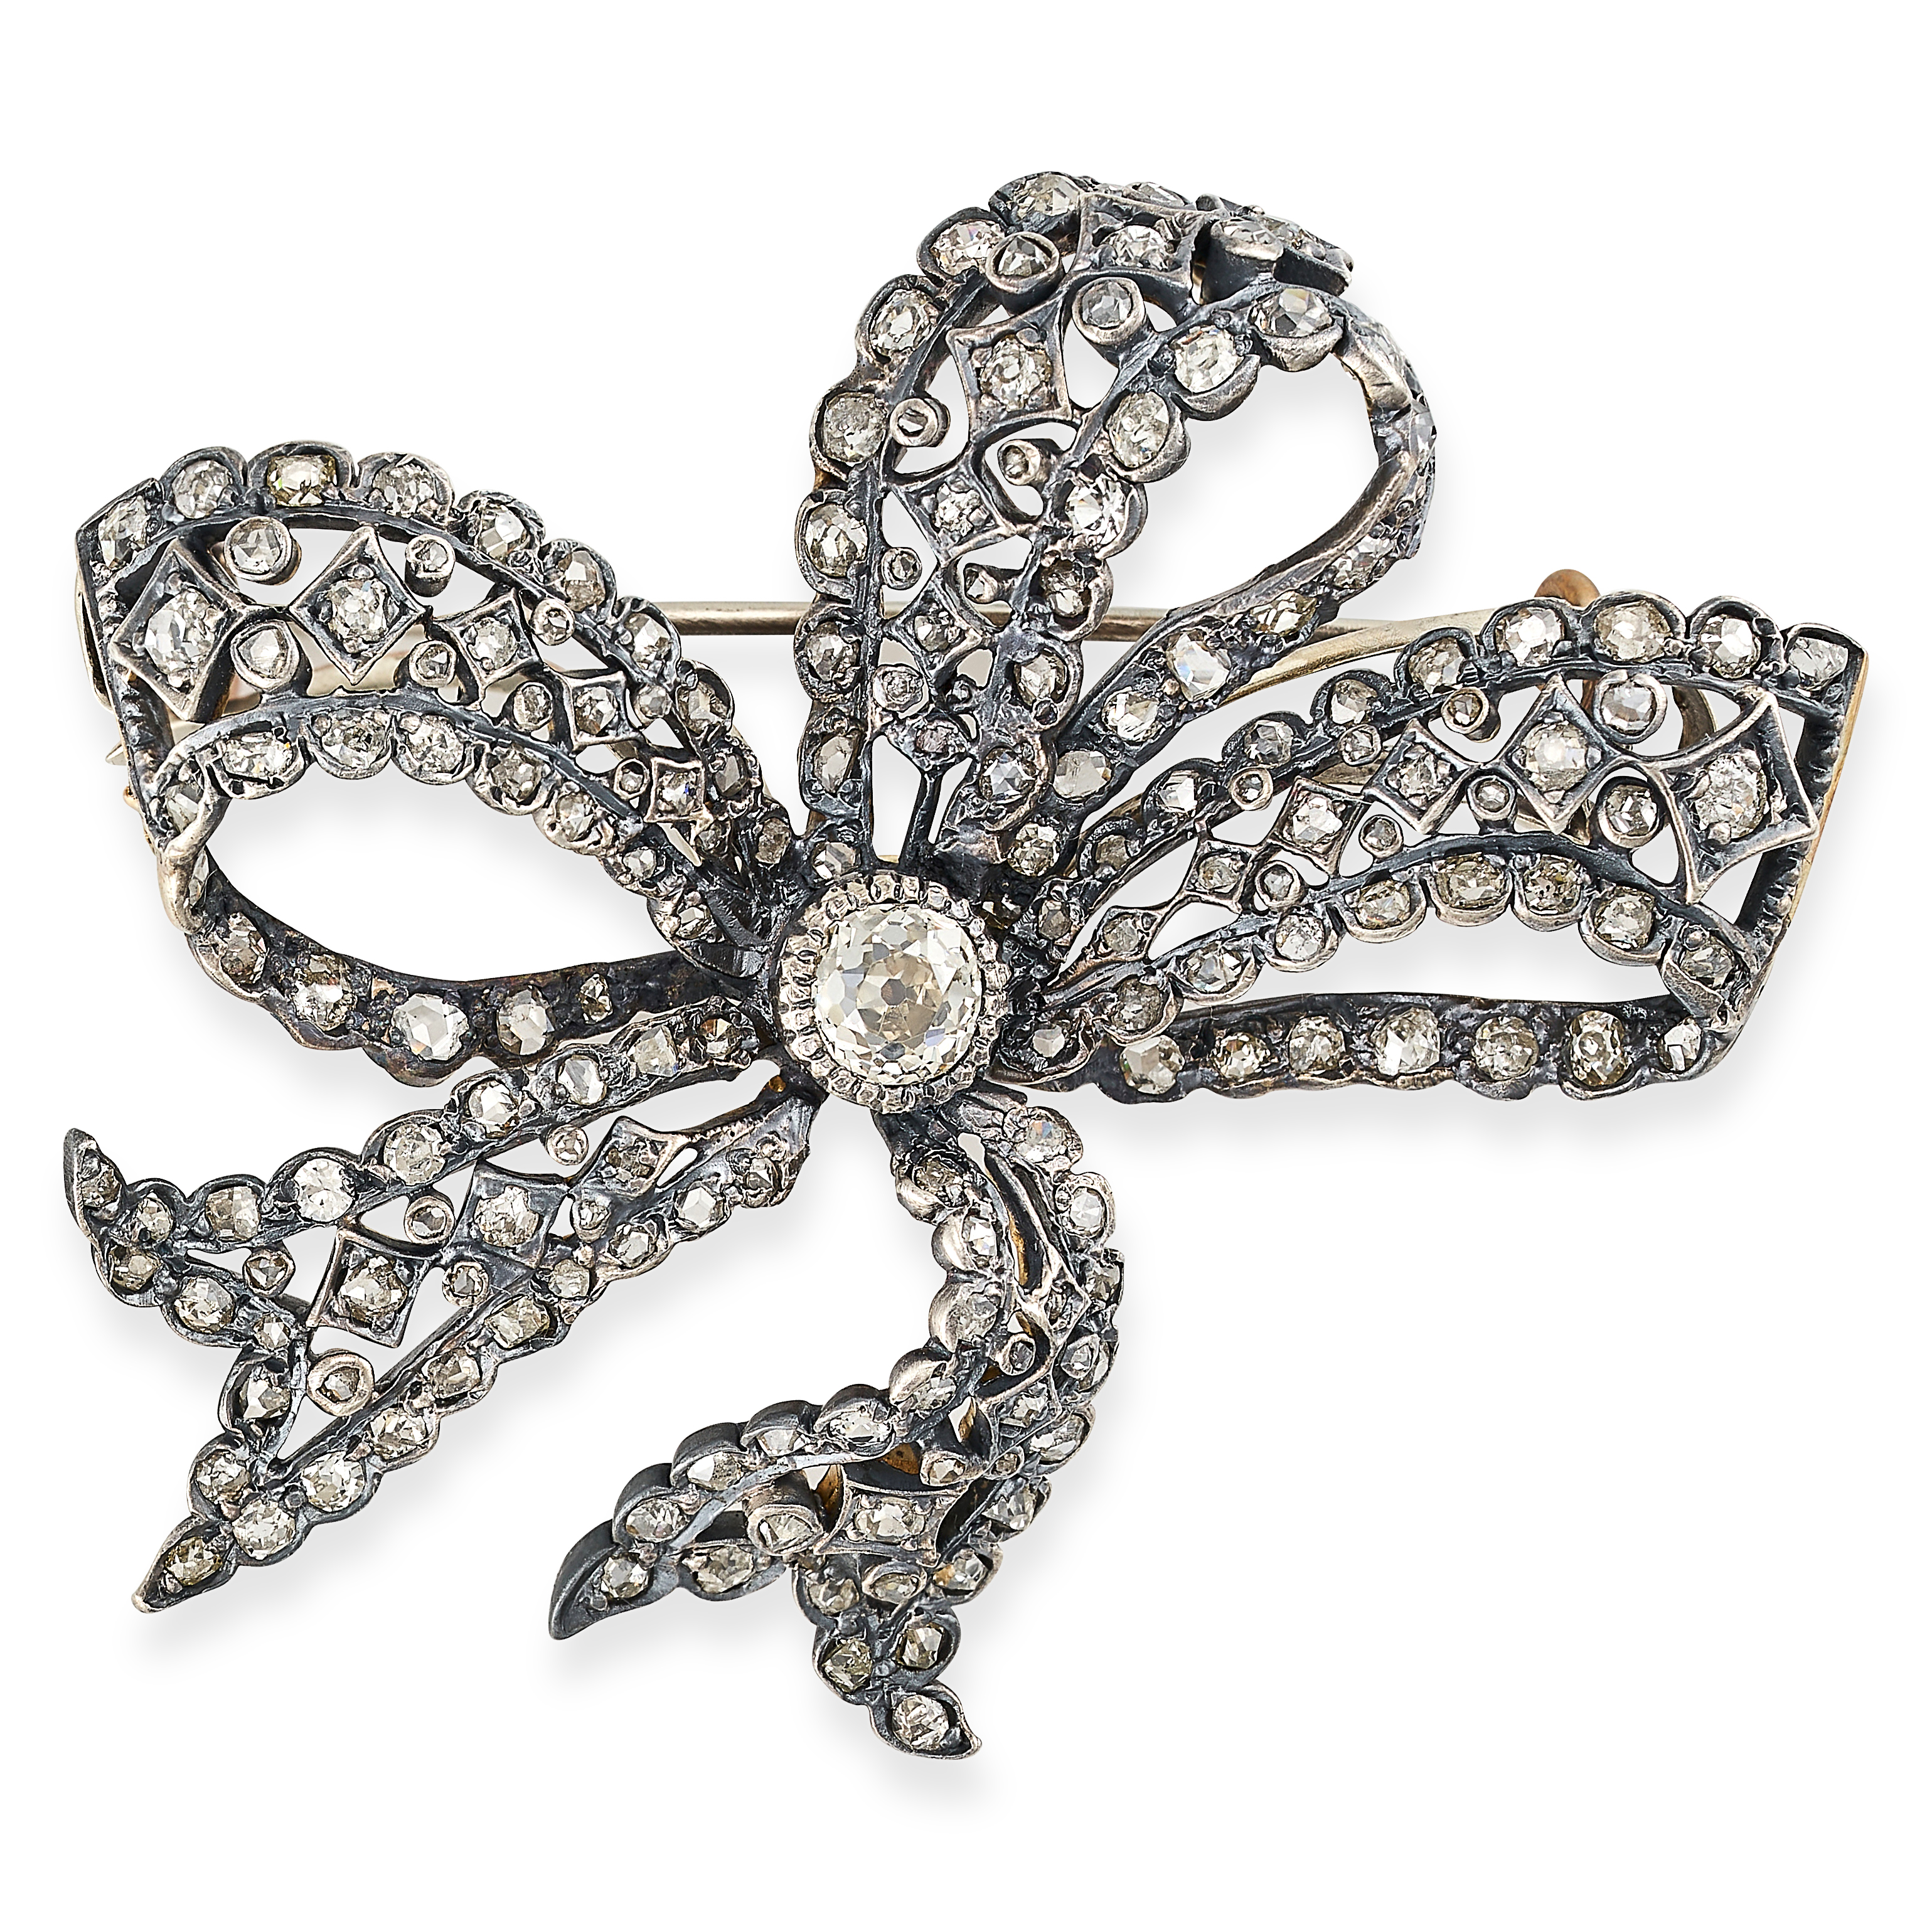 AN ANTIQUE DIAMOND BOW BROOCH in yellow gold and silver, designed as a ribbon tied into a bow, set